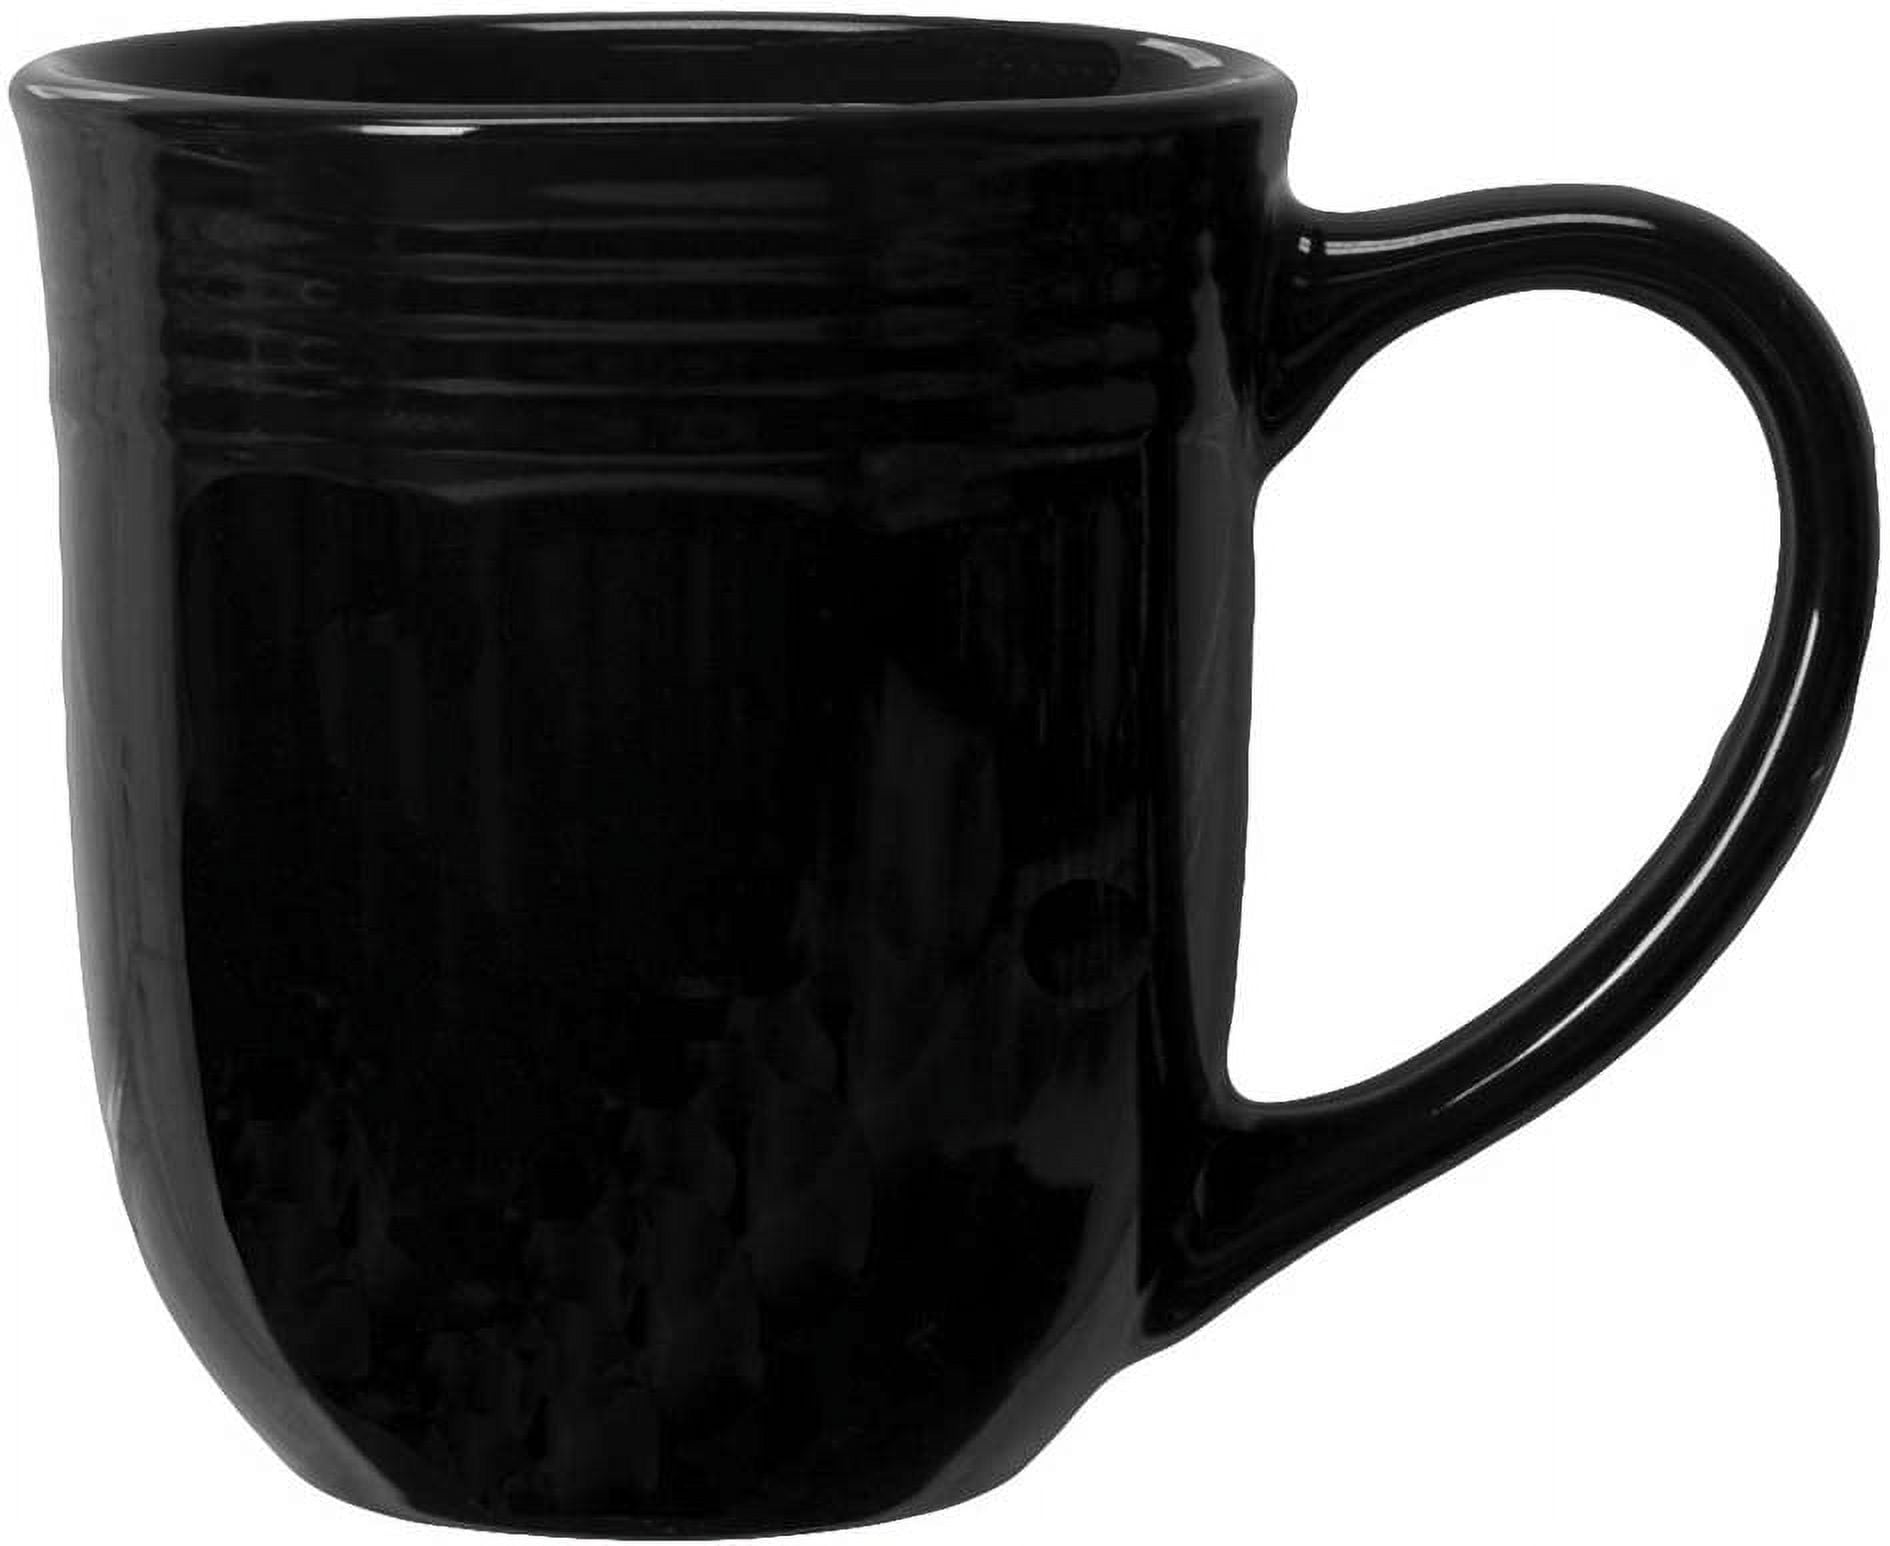 Up To 17% Off on Mainstays 5 Cup Black Coffee